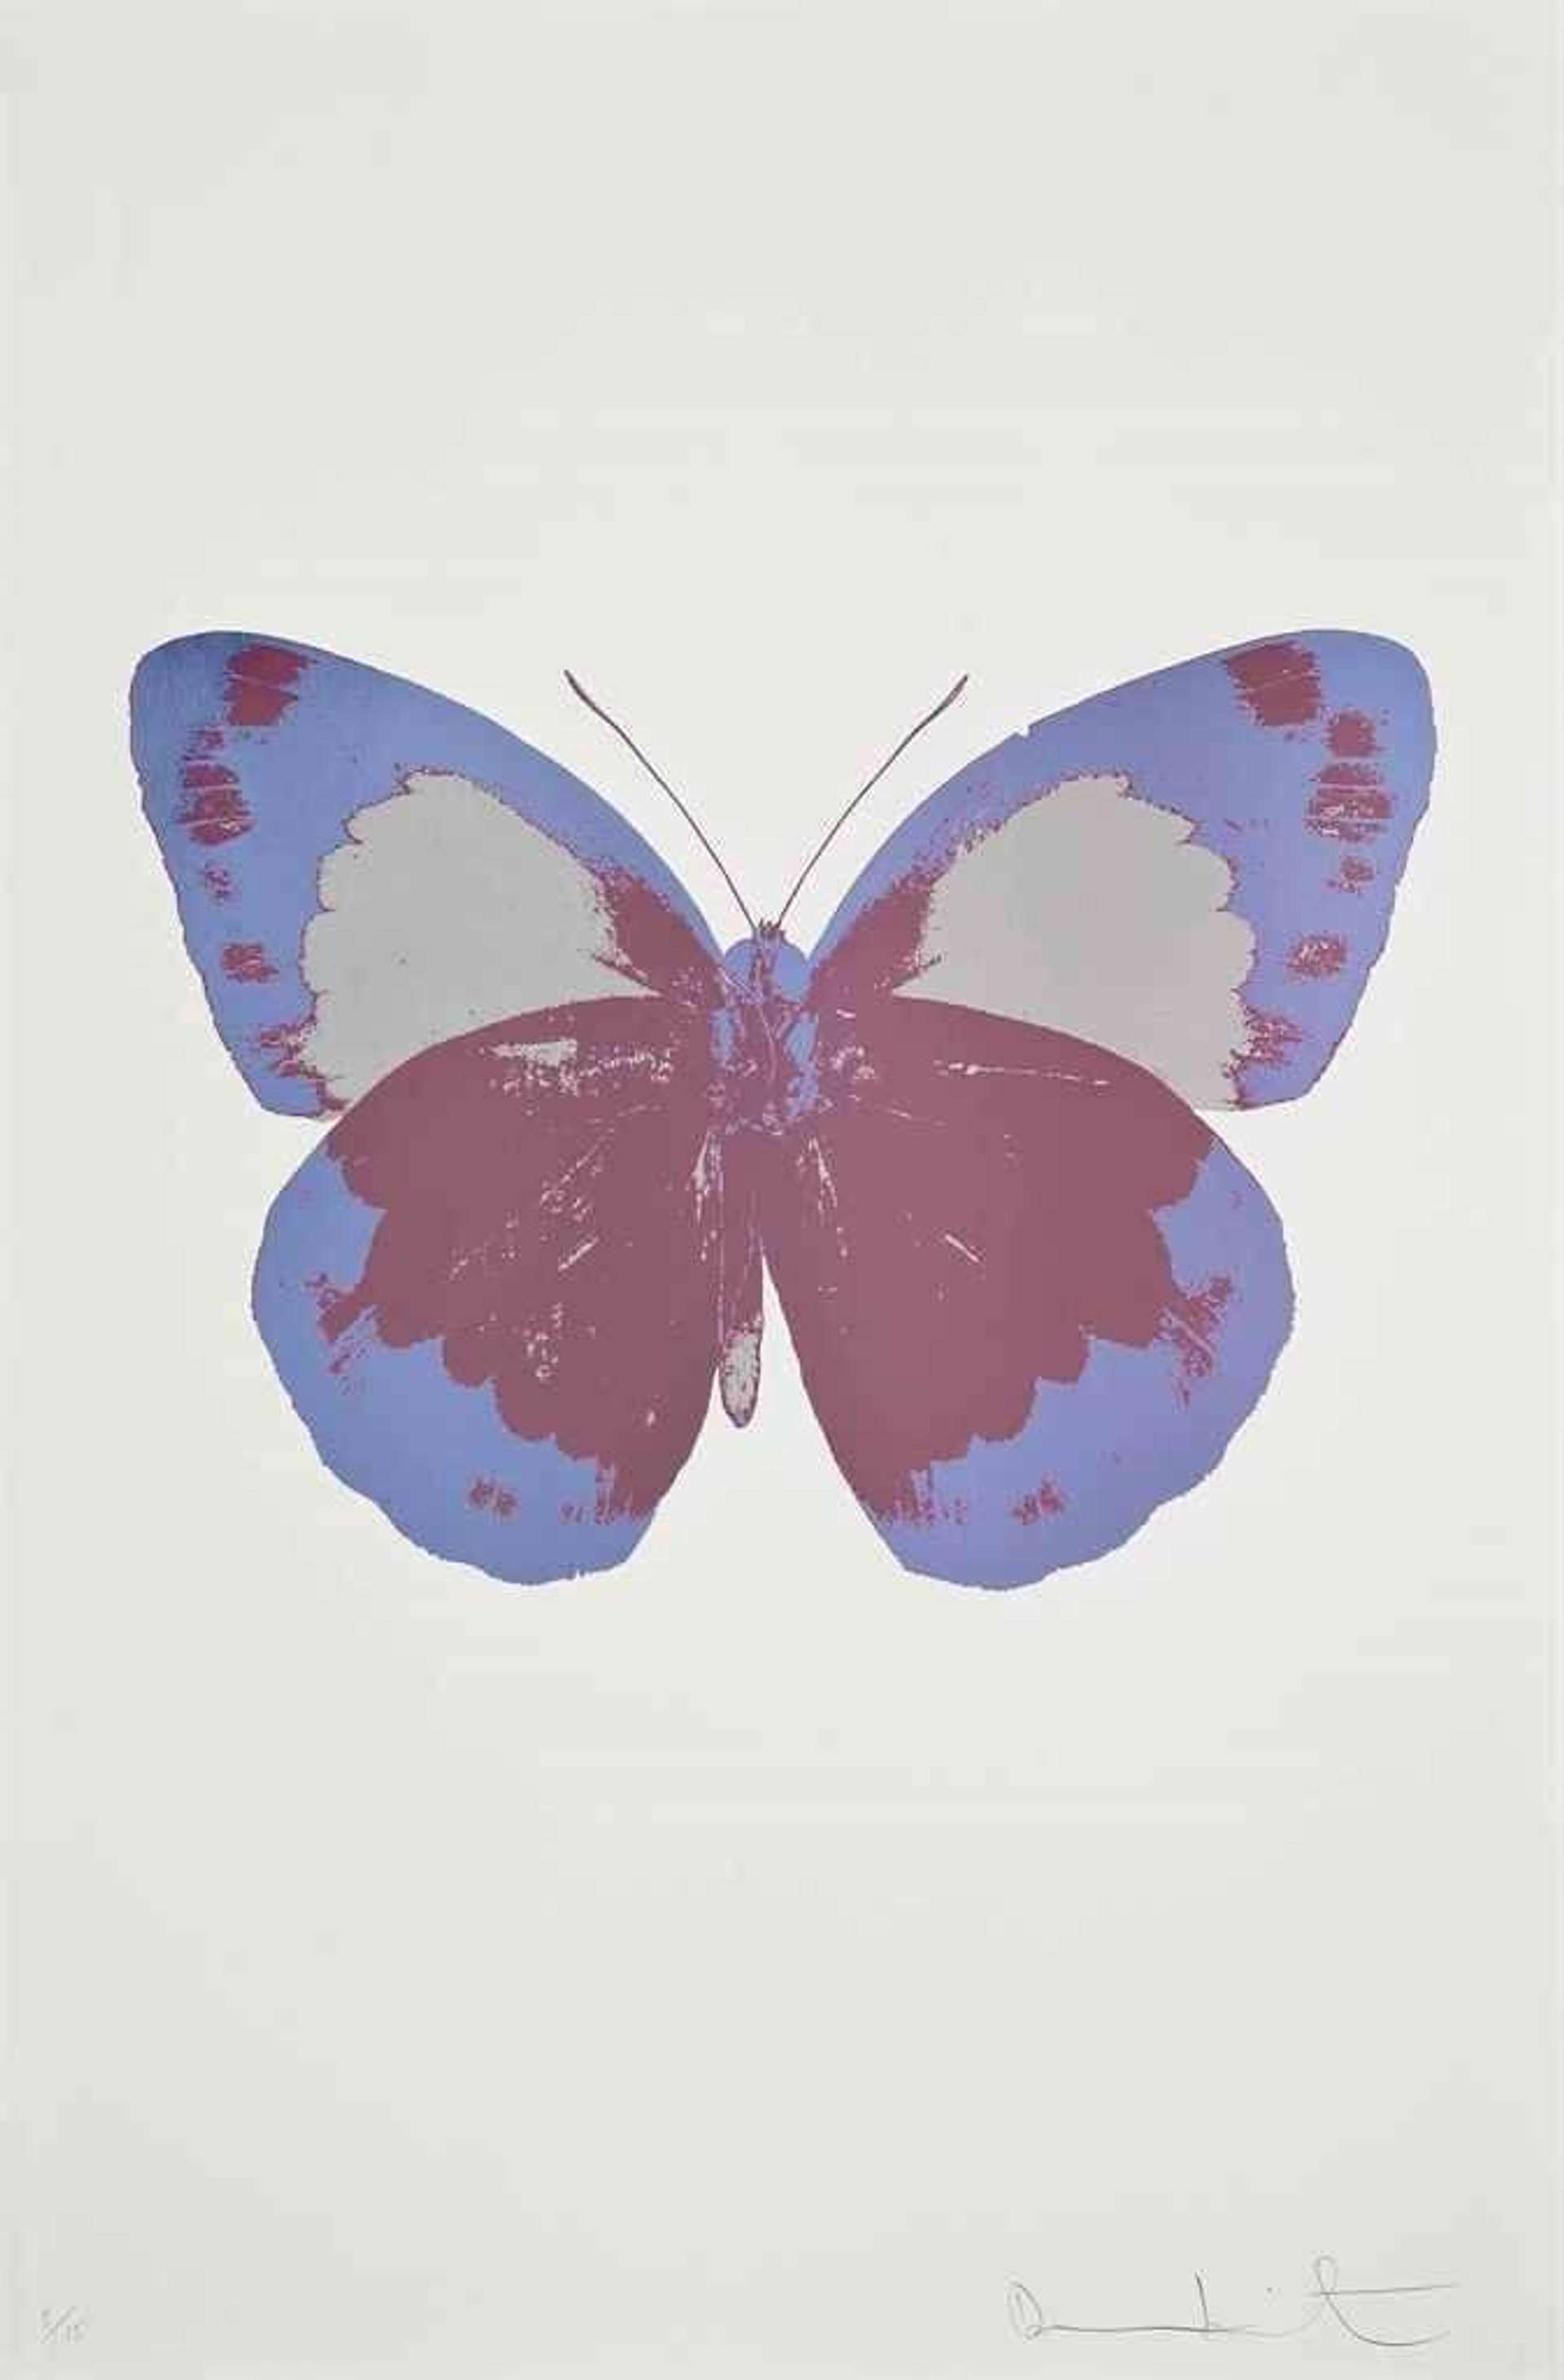 Damien Hirst: The Souls II (loganberry pink, cornflower blue, silver gloss) - Signed Print